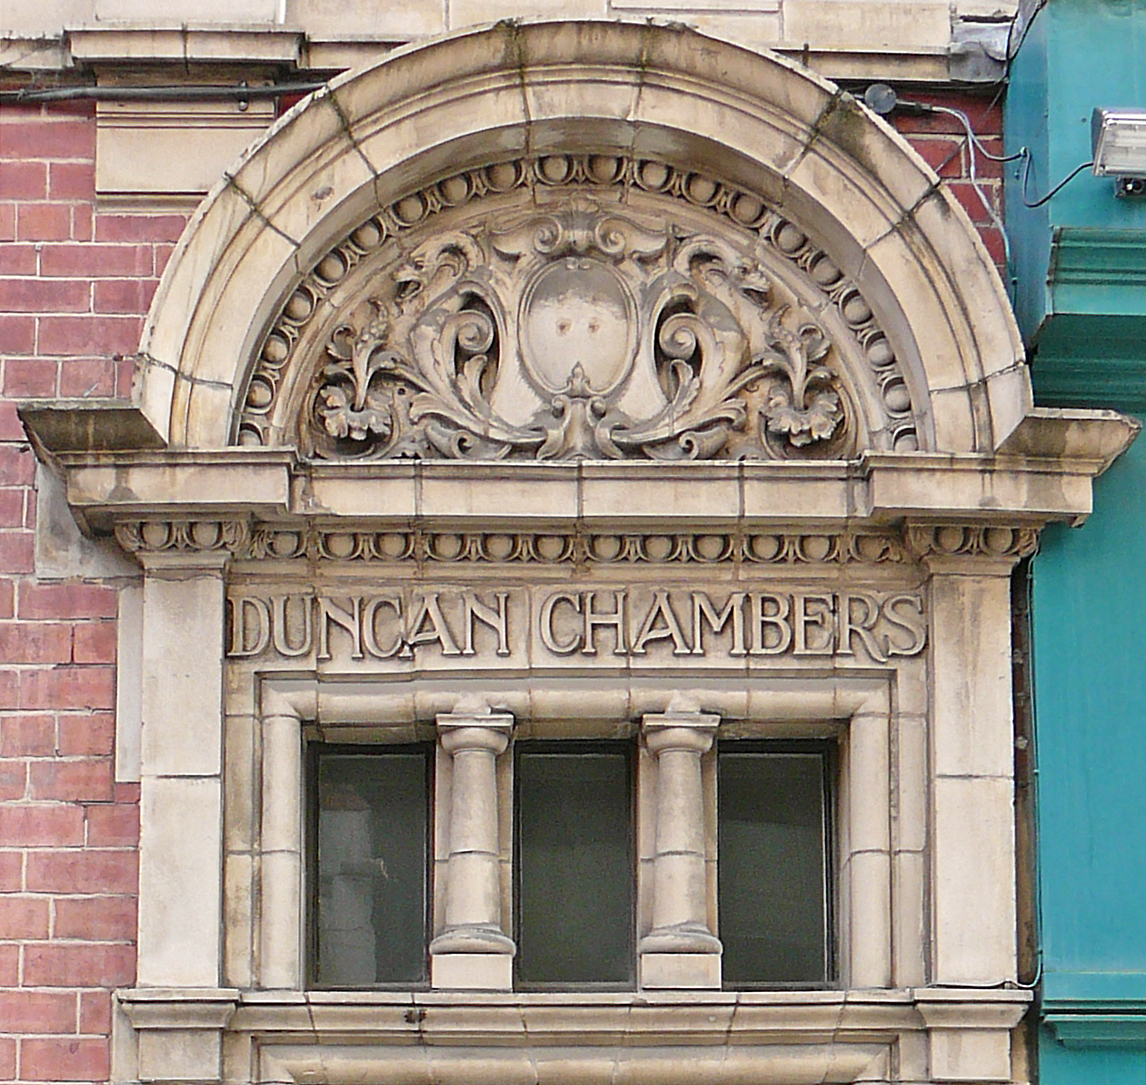 the building has the name duncan chamberers on it